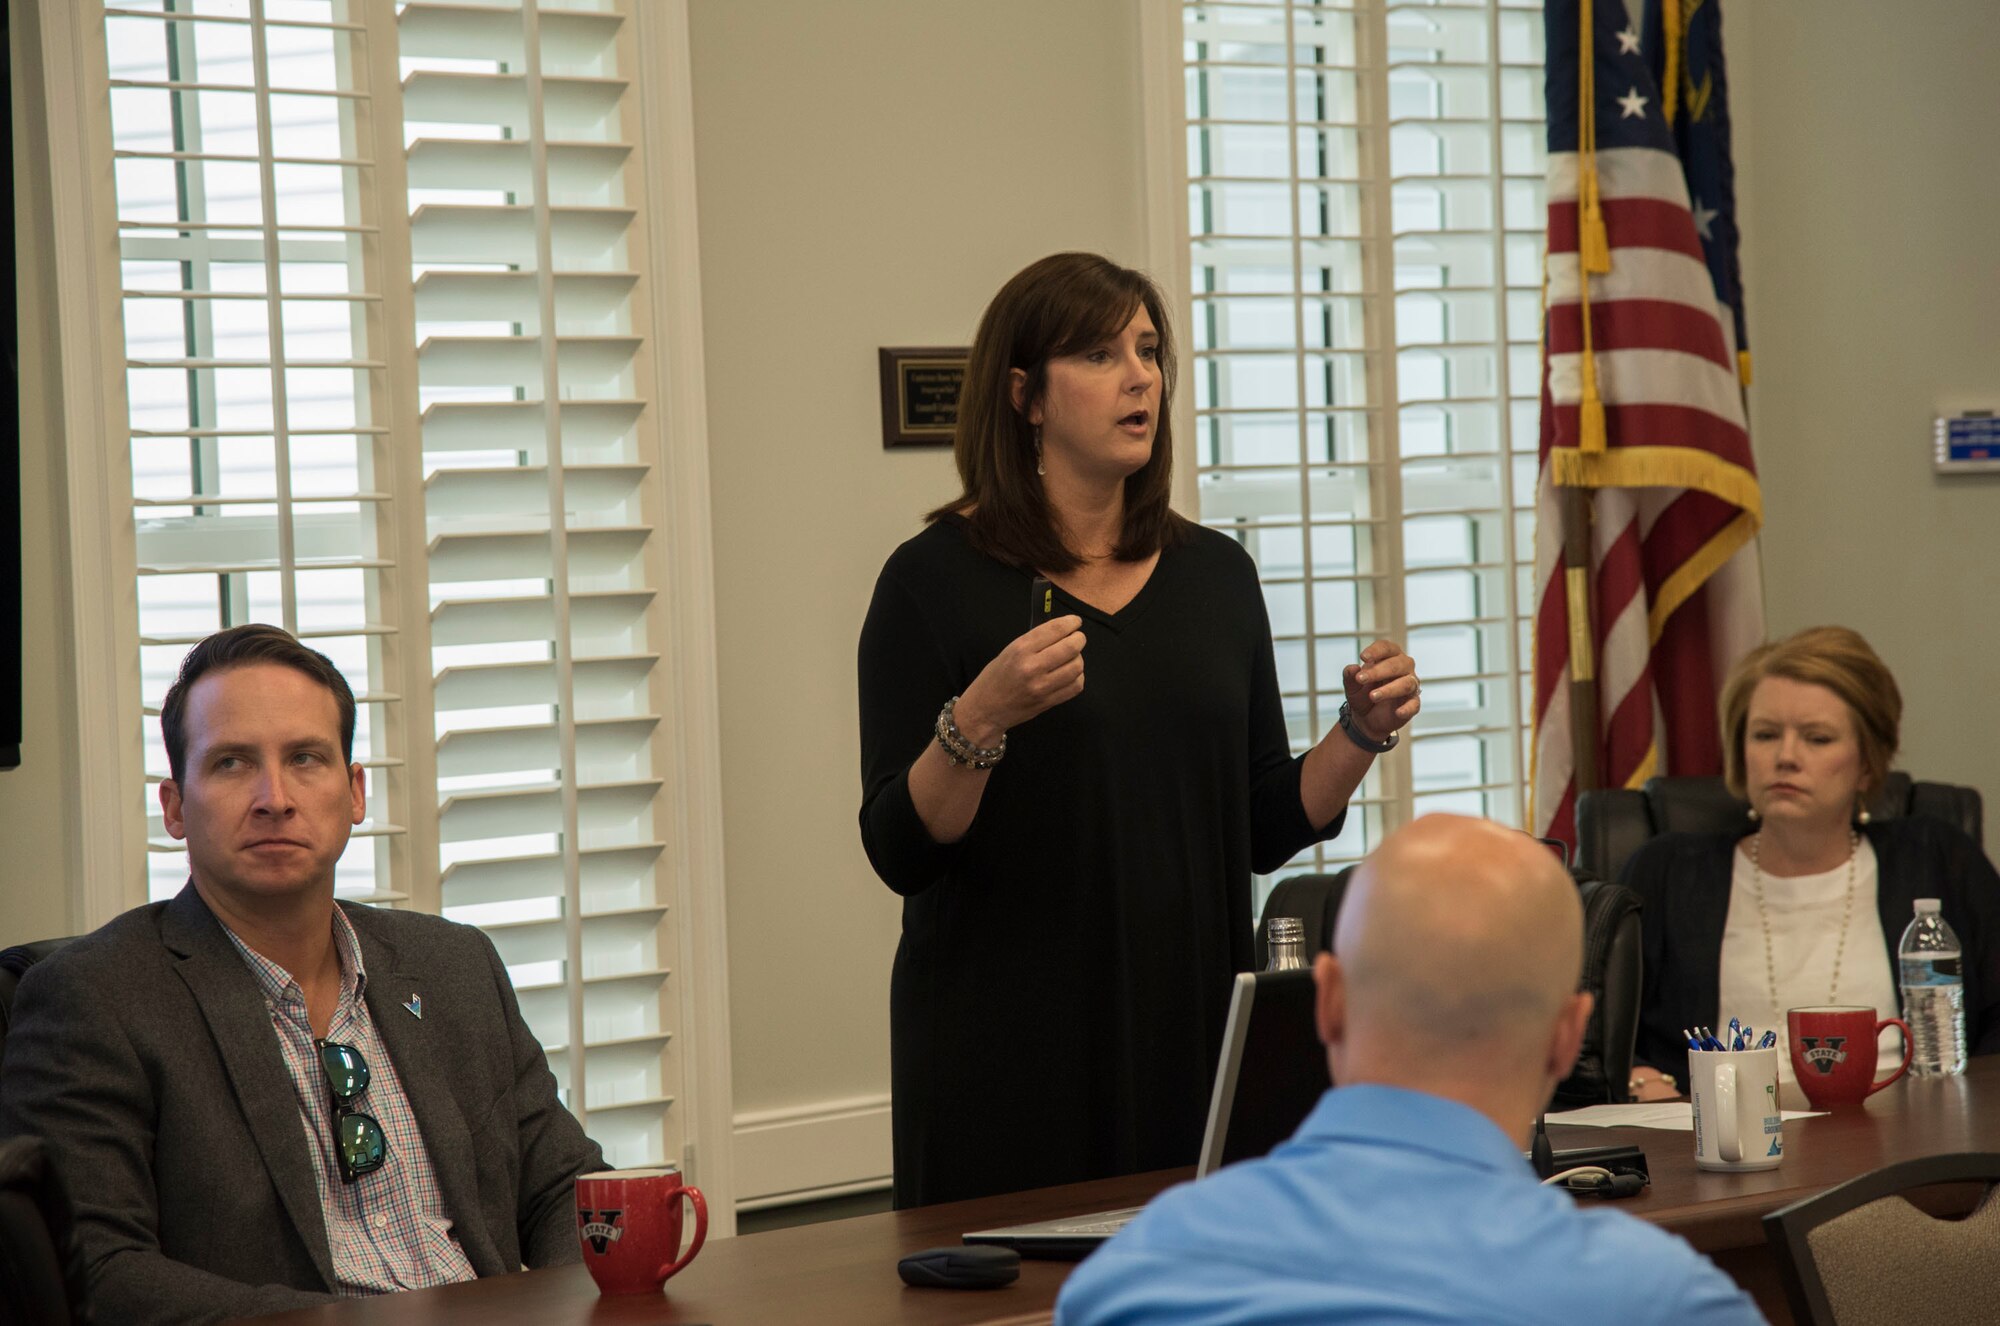 Andrea Schruijer, Executive Director Valdosta-Lowndes Development Authority, speaks with members of Leadership Moody about the role the Valdosta-Lowndes Development Authority plays in the local area, May 12th, 2017, at the Valdosta-Lowndes Development Authority. Leadership Moody is a development leadership program at Moody Air Force Base where selected Senior Non-Commissioned Officers, Field Grade Officers, and civilians gain leadership insights from local area leaders in government, education or other community agencies. (U.S. Air Force Photo by Capt. Korey Fratini)